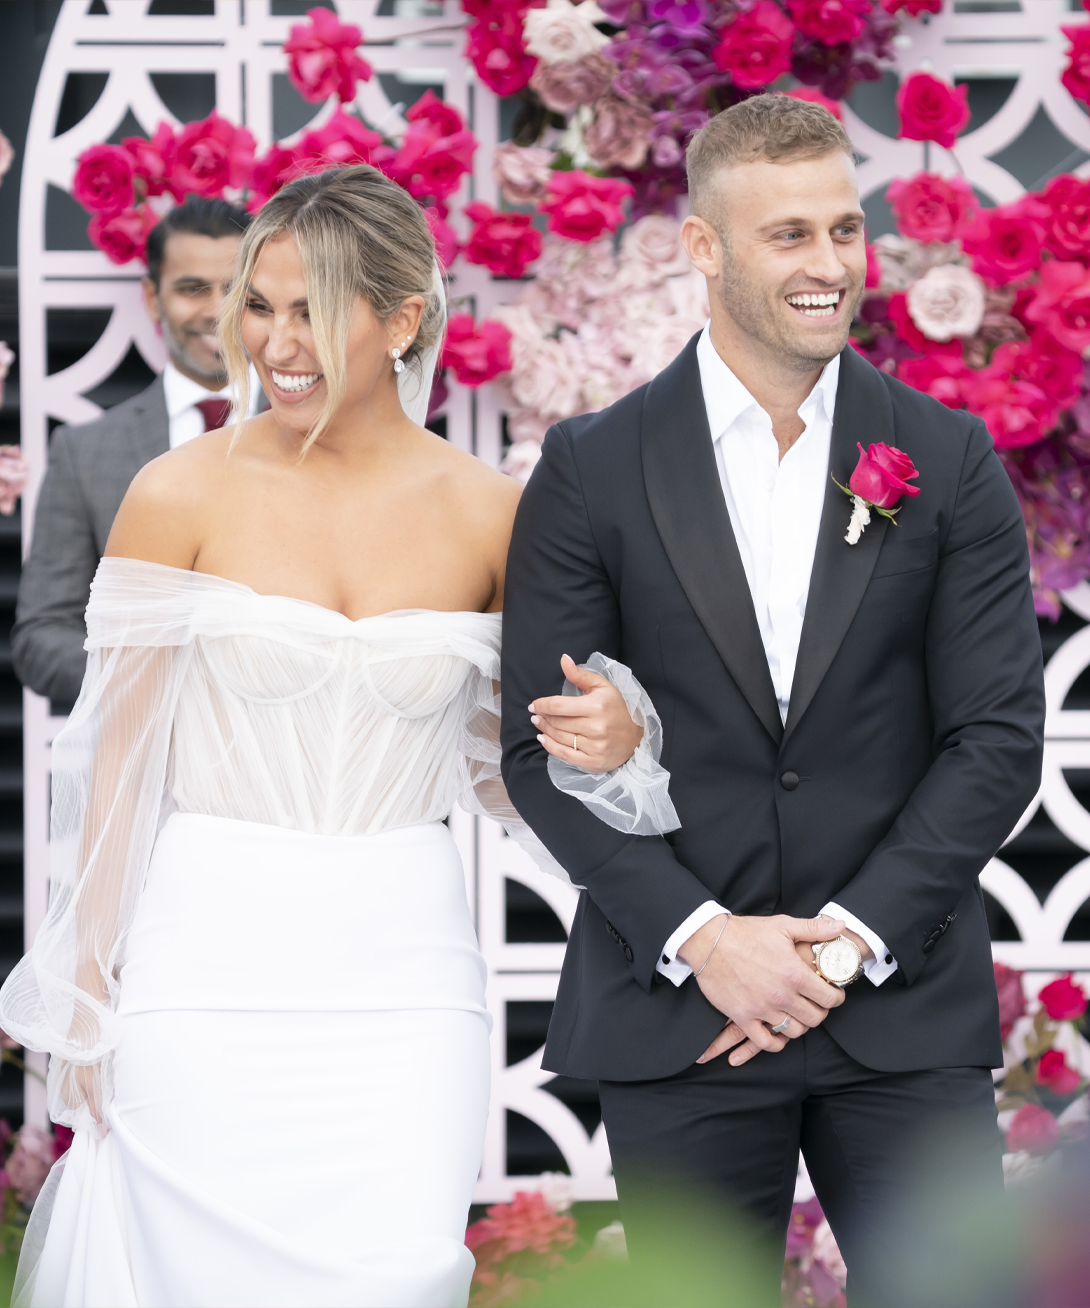 Married at First Sight Recap: Season 15 Cast on Decision Day Outcomes